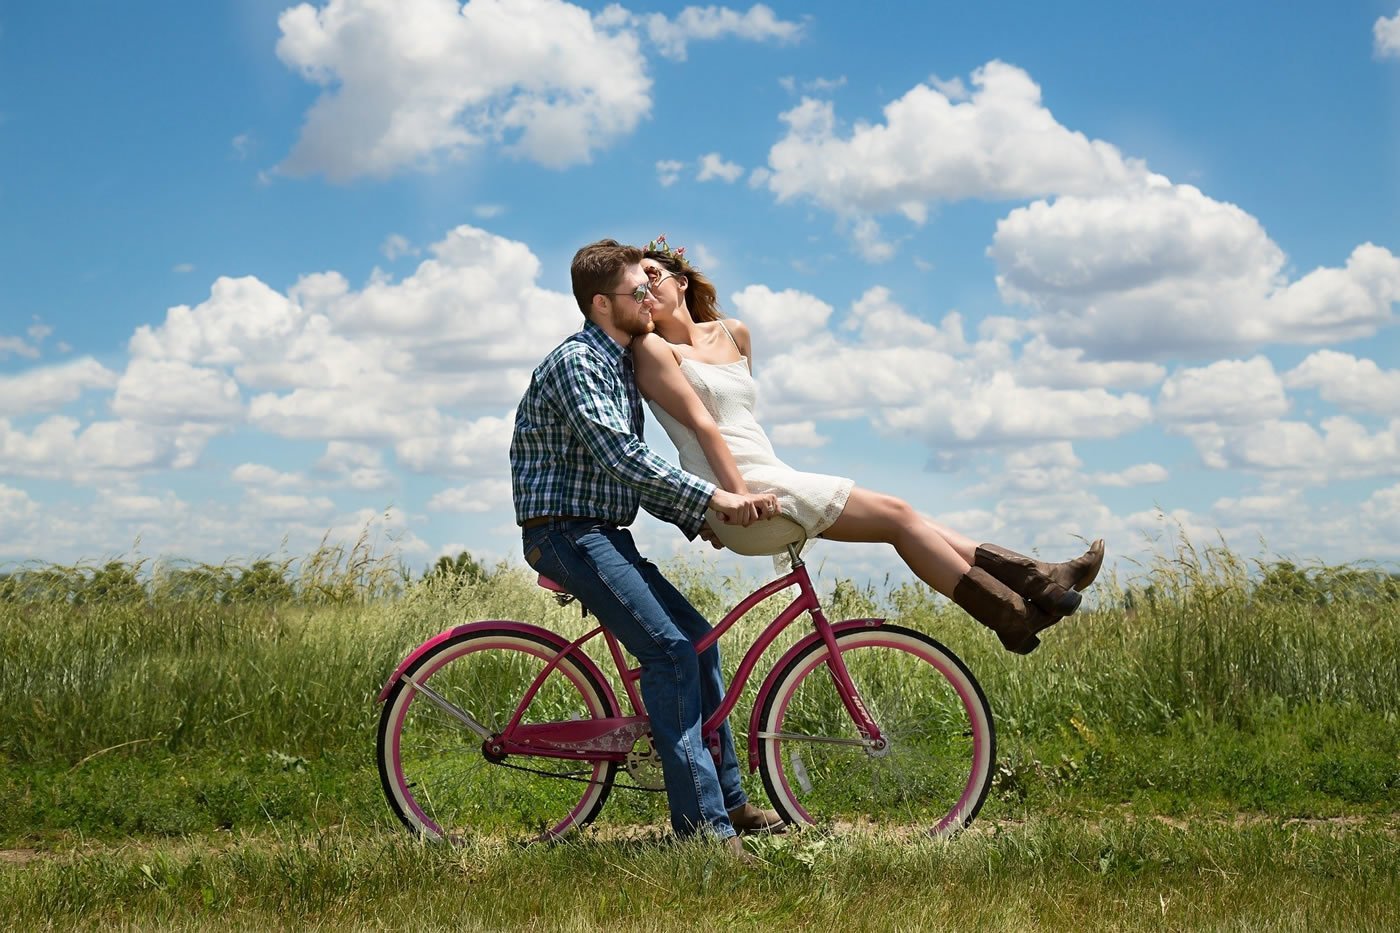 This shows a couple on a bicycle